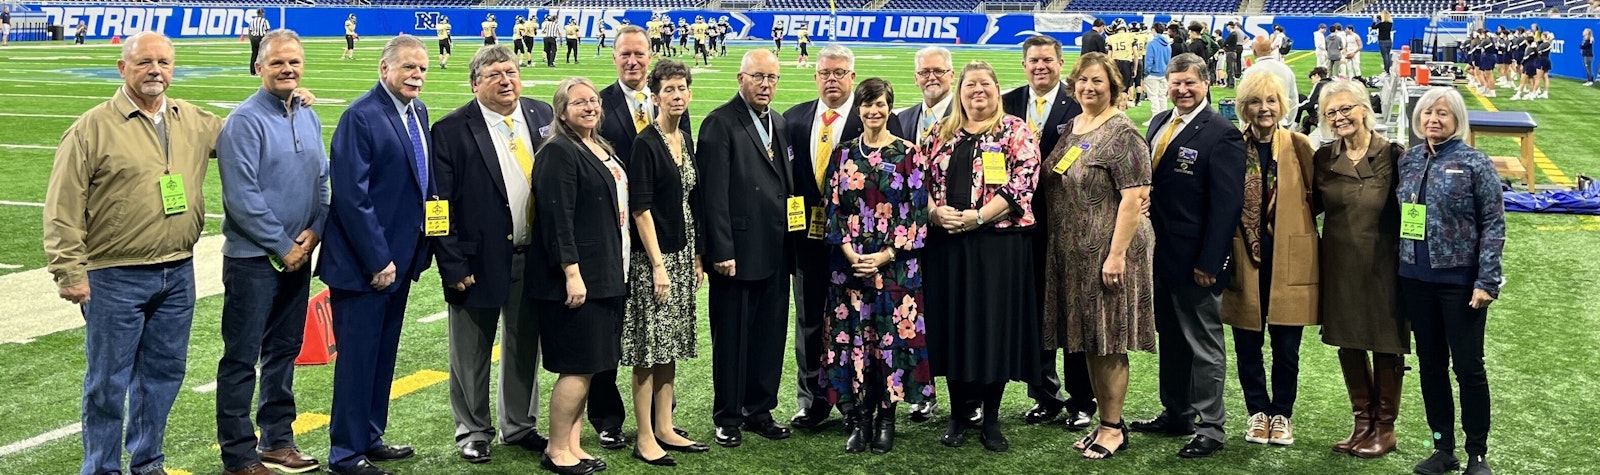 Brothers Tom and Jim Joseph (far left) and their sisters Mary Ann and Patricia, and Tom’s wife Ann Marie (on far right) join officers of the Knights of Columbus in celebrating the 50th anniversary of the Knights’ sponsorship of the Prep Bowl and Catholic League that their father Julian Joseph played a pivotal role in making it happen. (Photos provided by Jim Joseph)